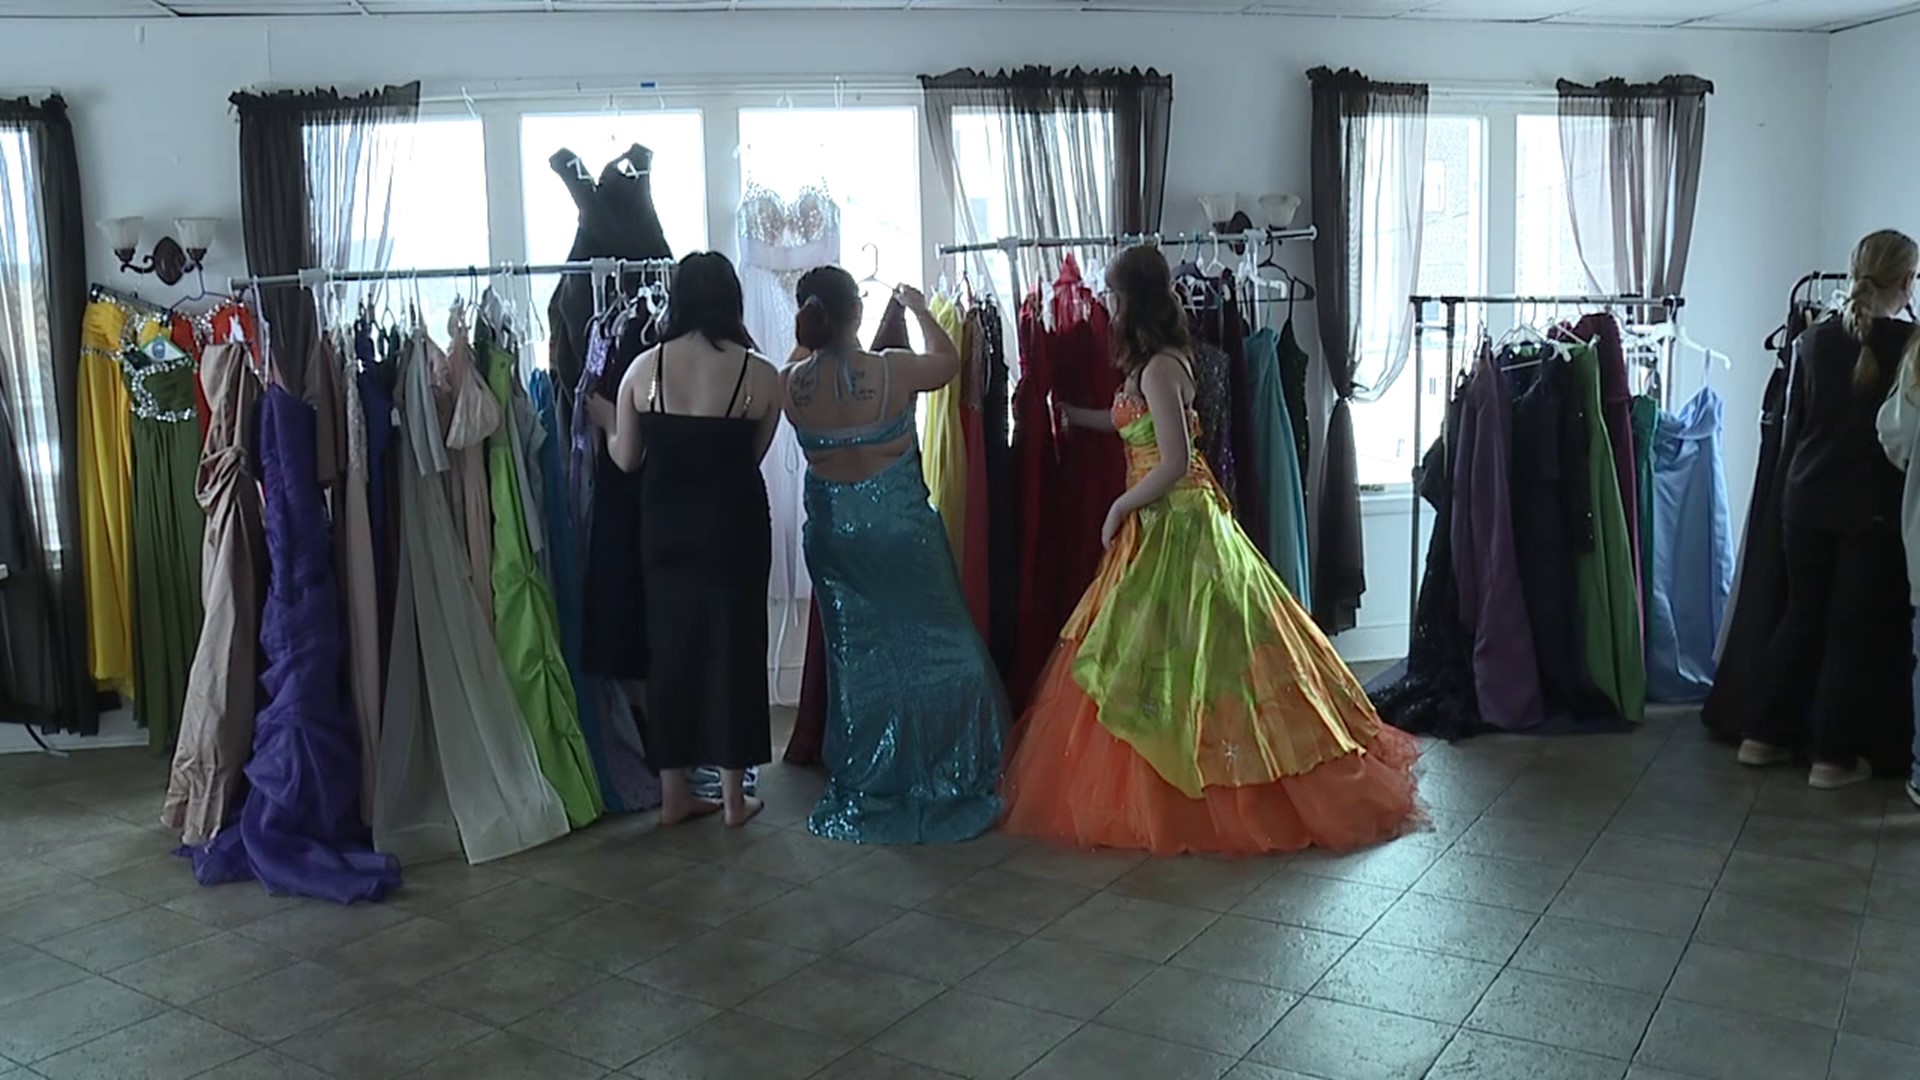 Chloe Birt helped organize the prom dress giveaway at Intoxicology Department in Berwick.